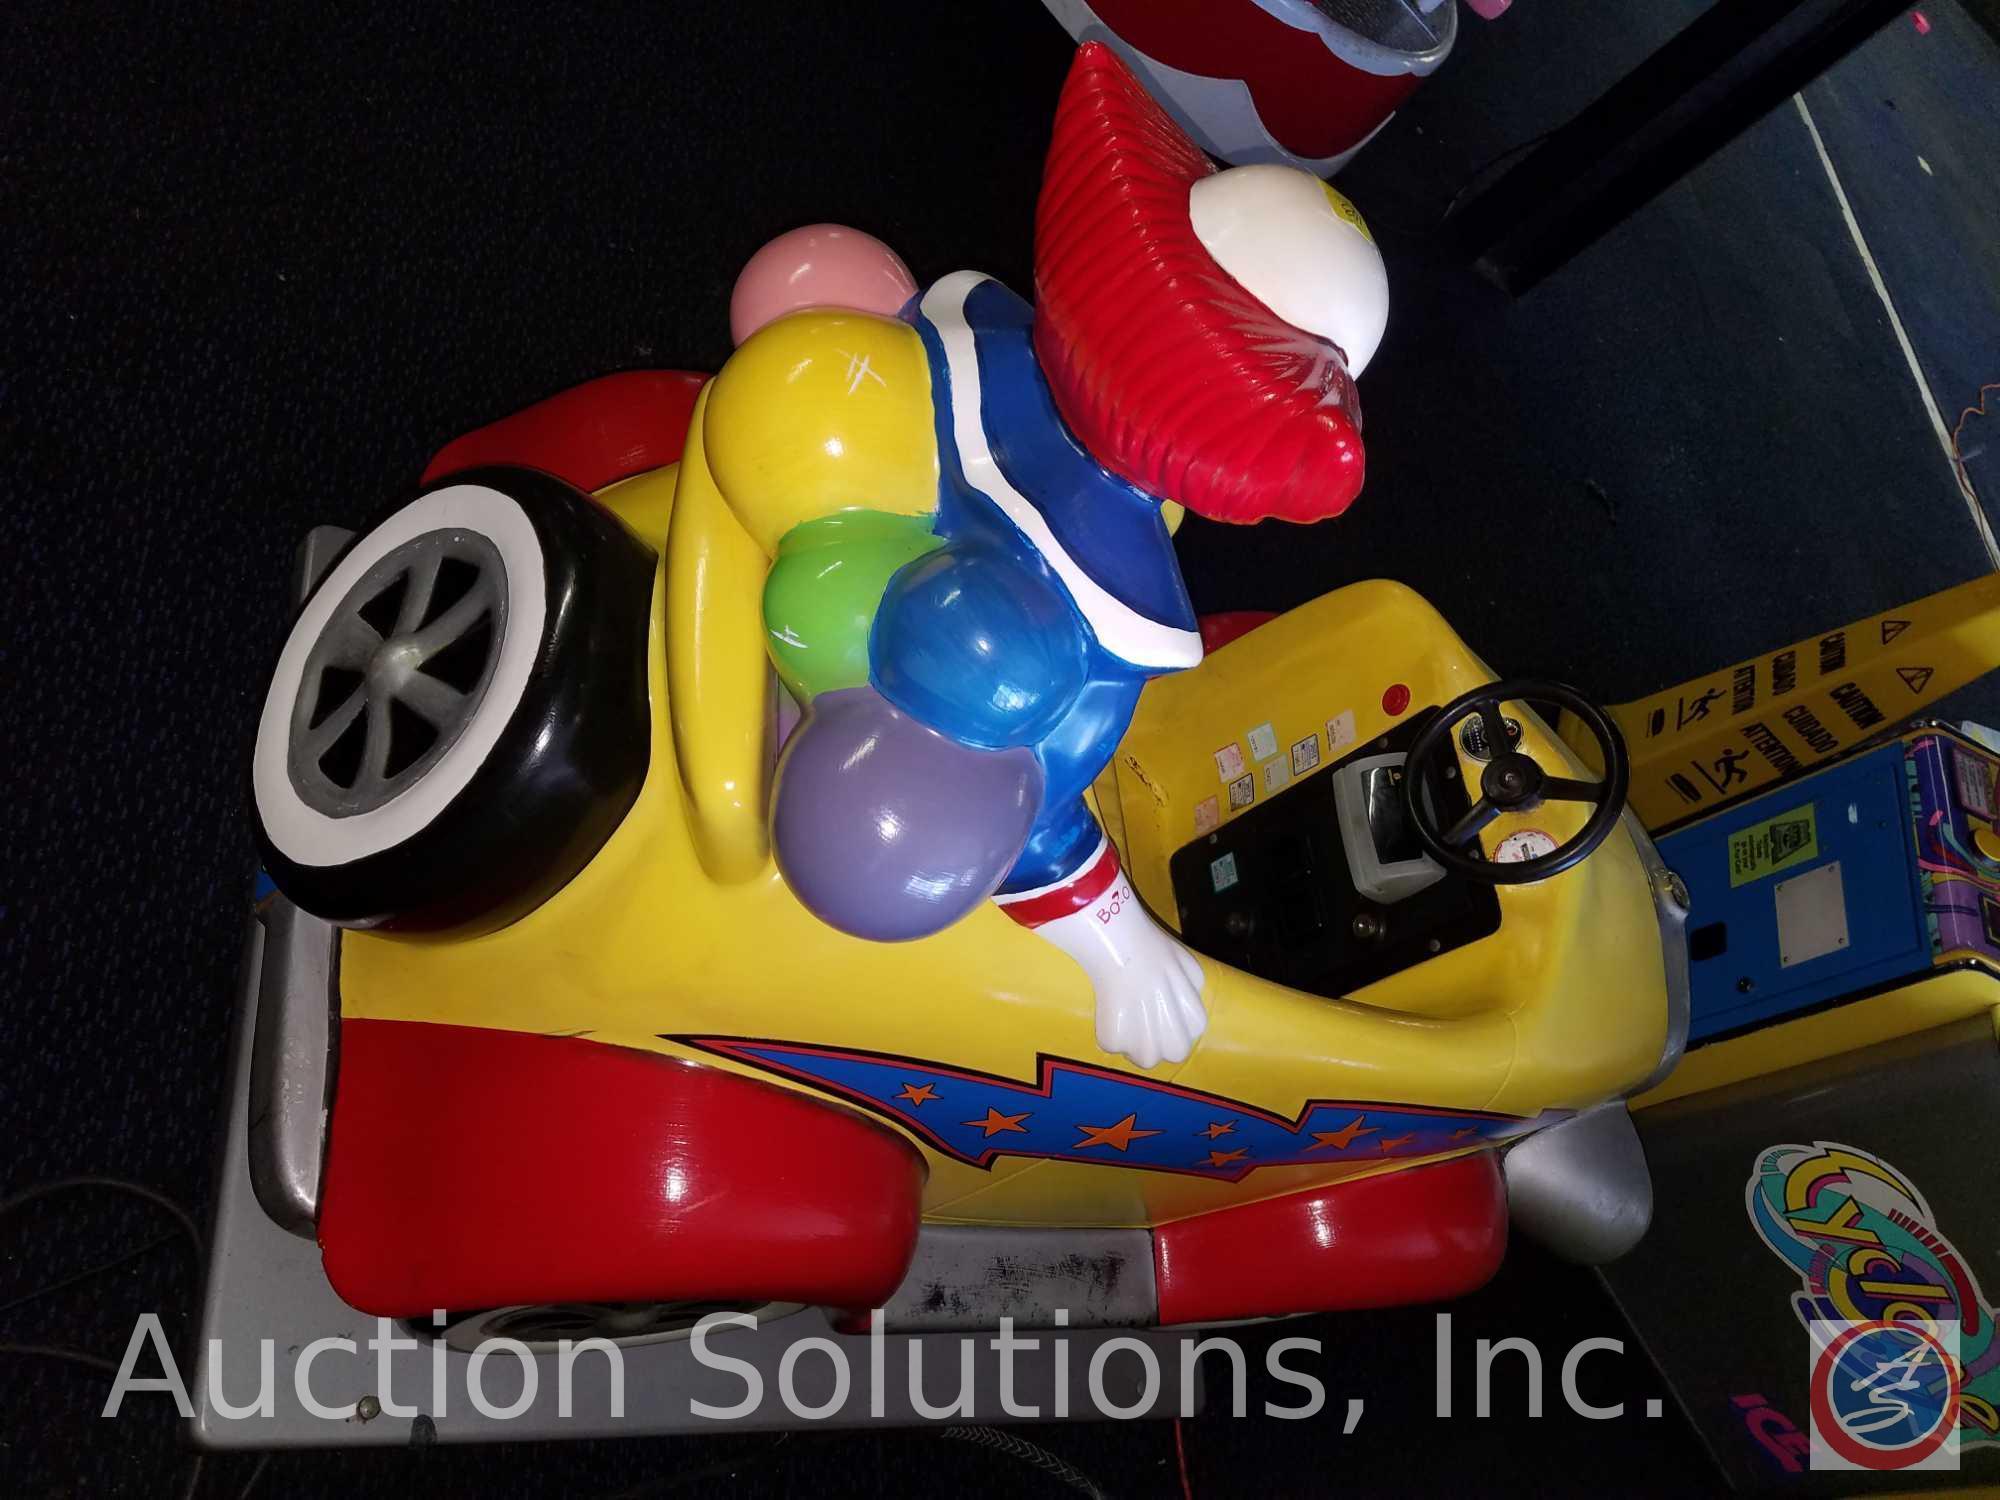 Bozo the Clown Kiddie Ride with Intercard Reader {{SOME GAMES MAY STILL HAVE COIN OP MECHANISMS